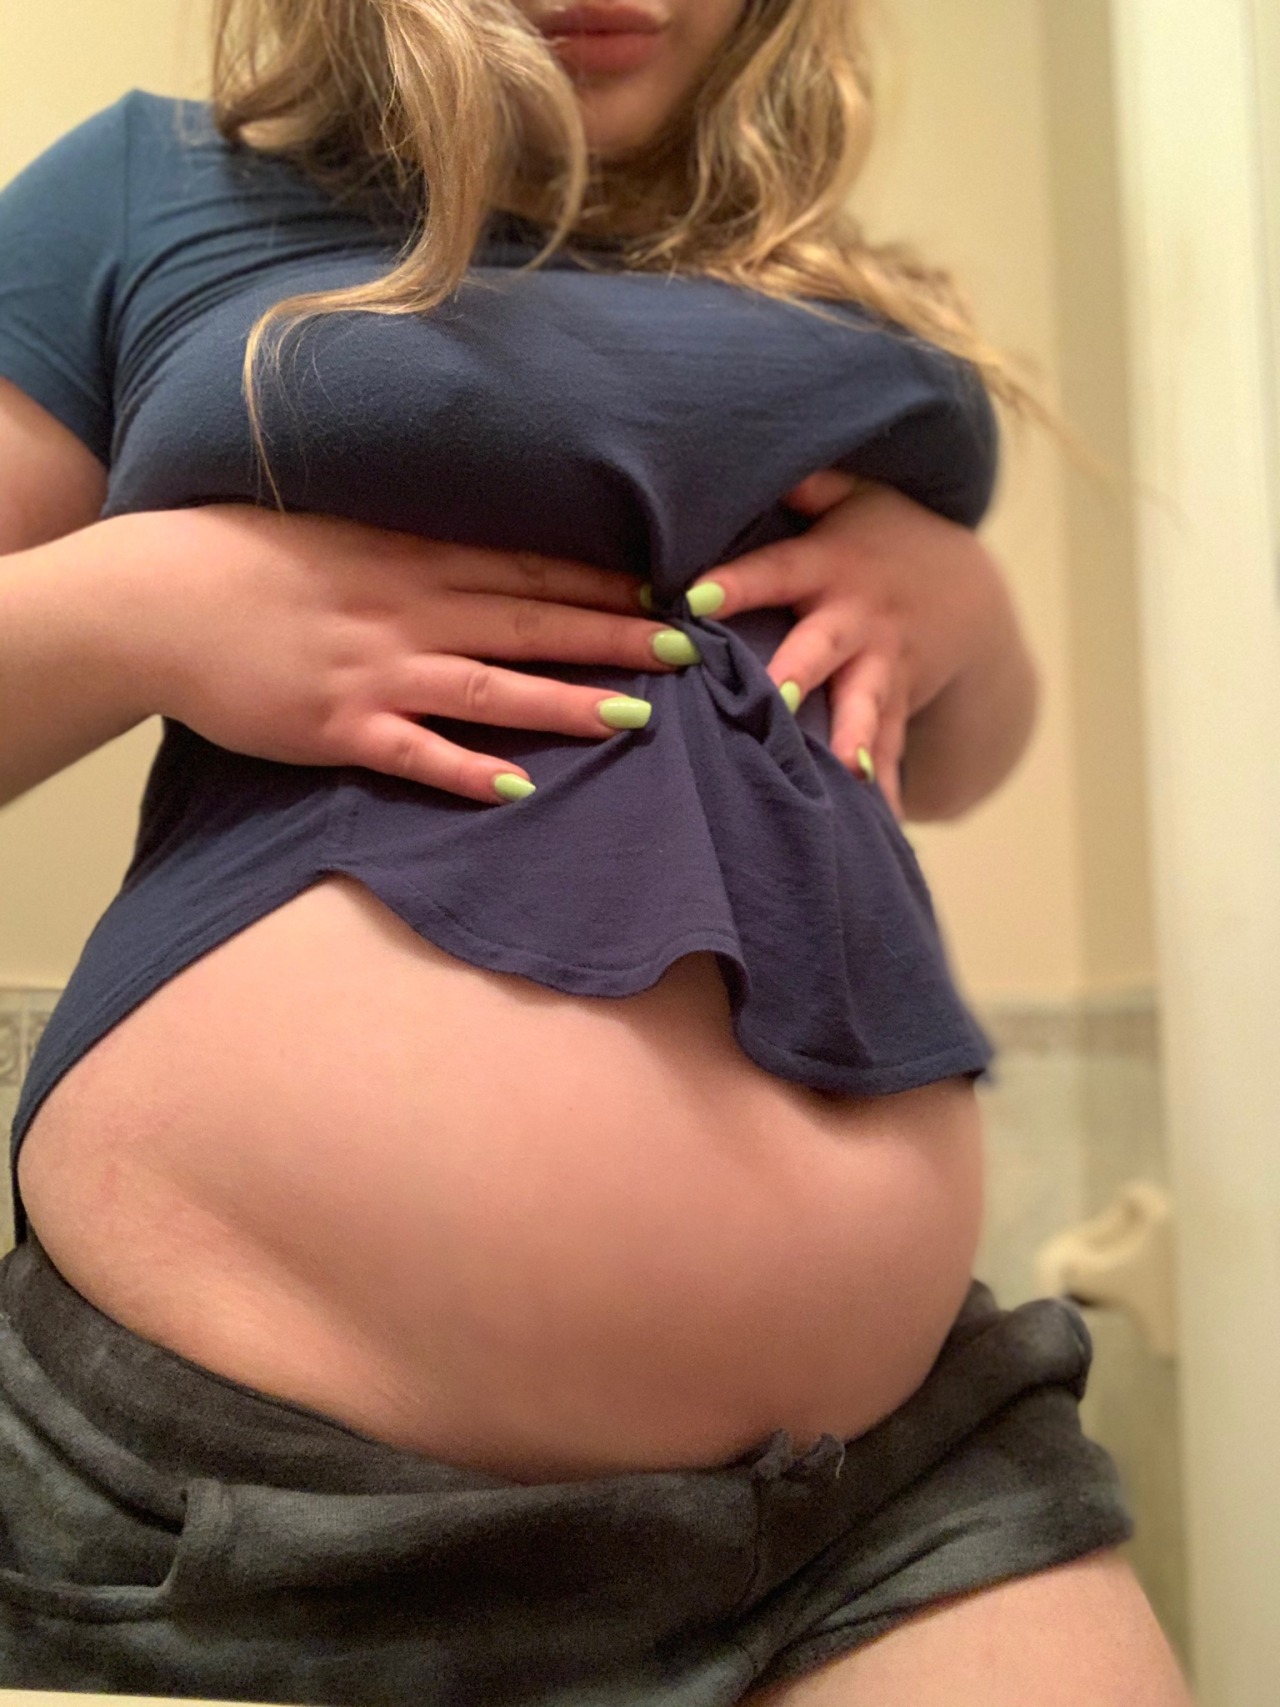 stuffed-princess-deactivated202:Nothing turns me on more than my round belly, really can’t believe how chubby I’ve gotten 